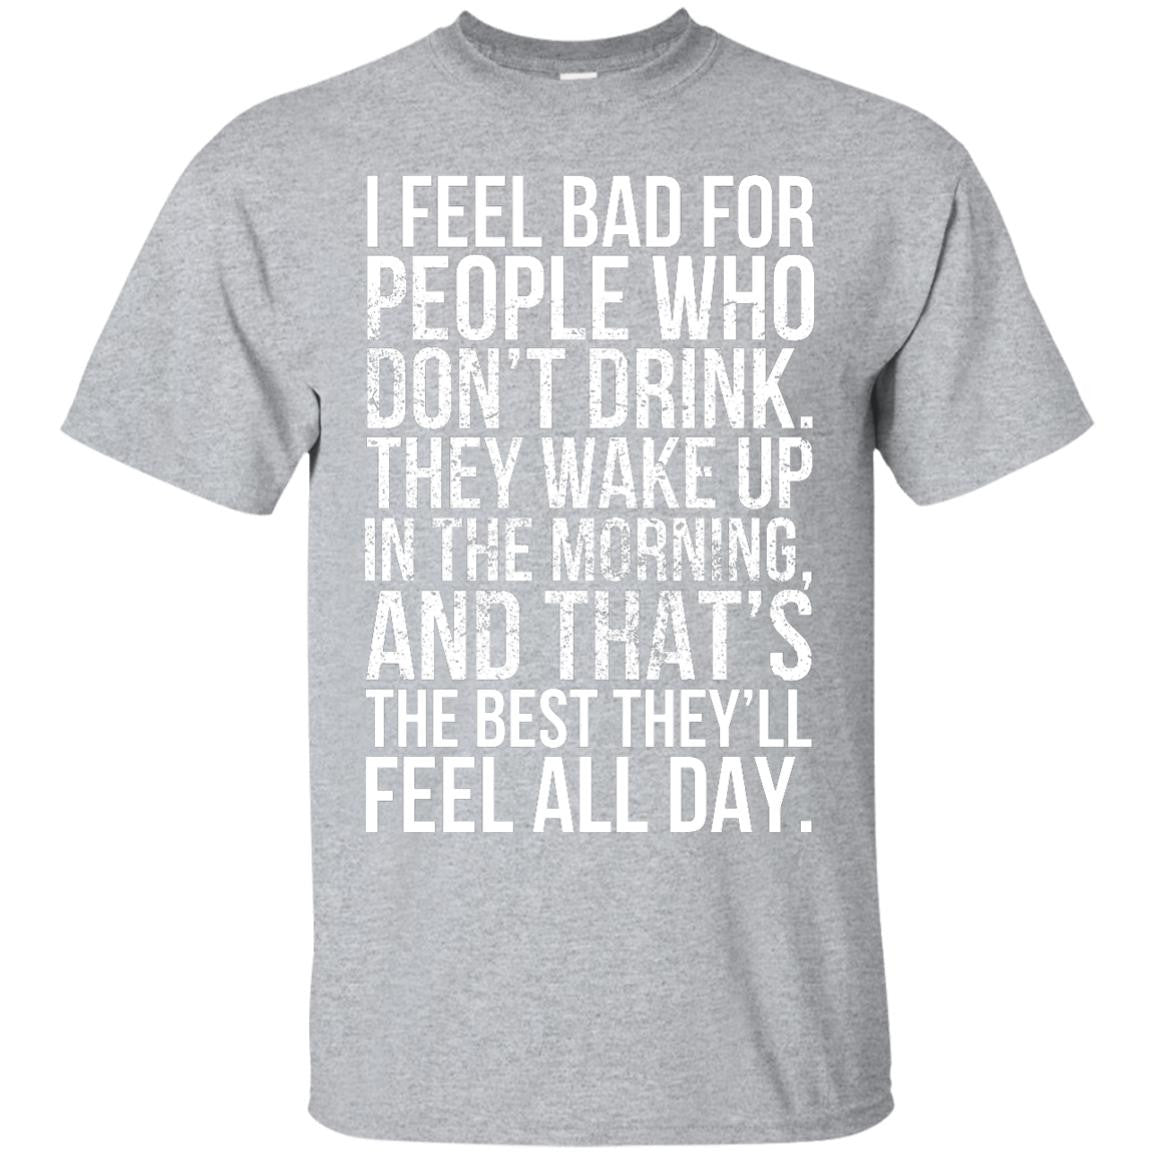 I Feel Bad For People Who Don't Drink. They Wake Up In The Morning, And That's The Best They'll Feel All Day. T-Shirt Apparel - The Beer Lodge